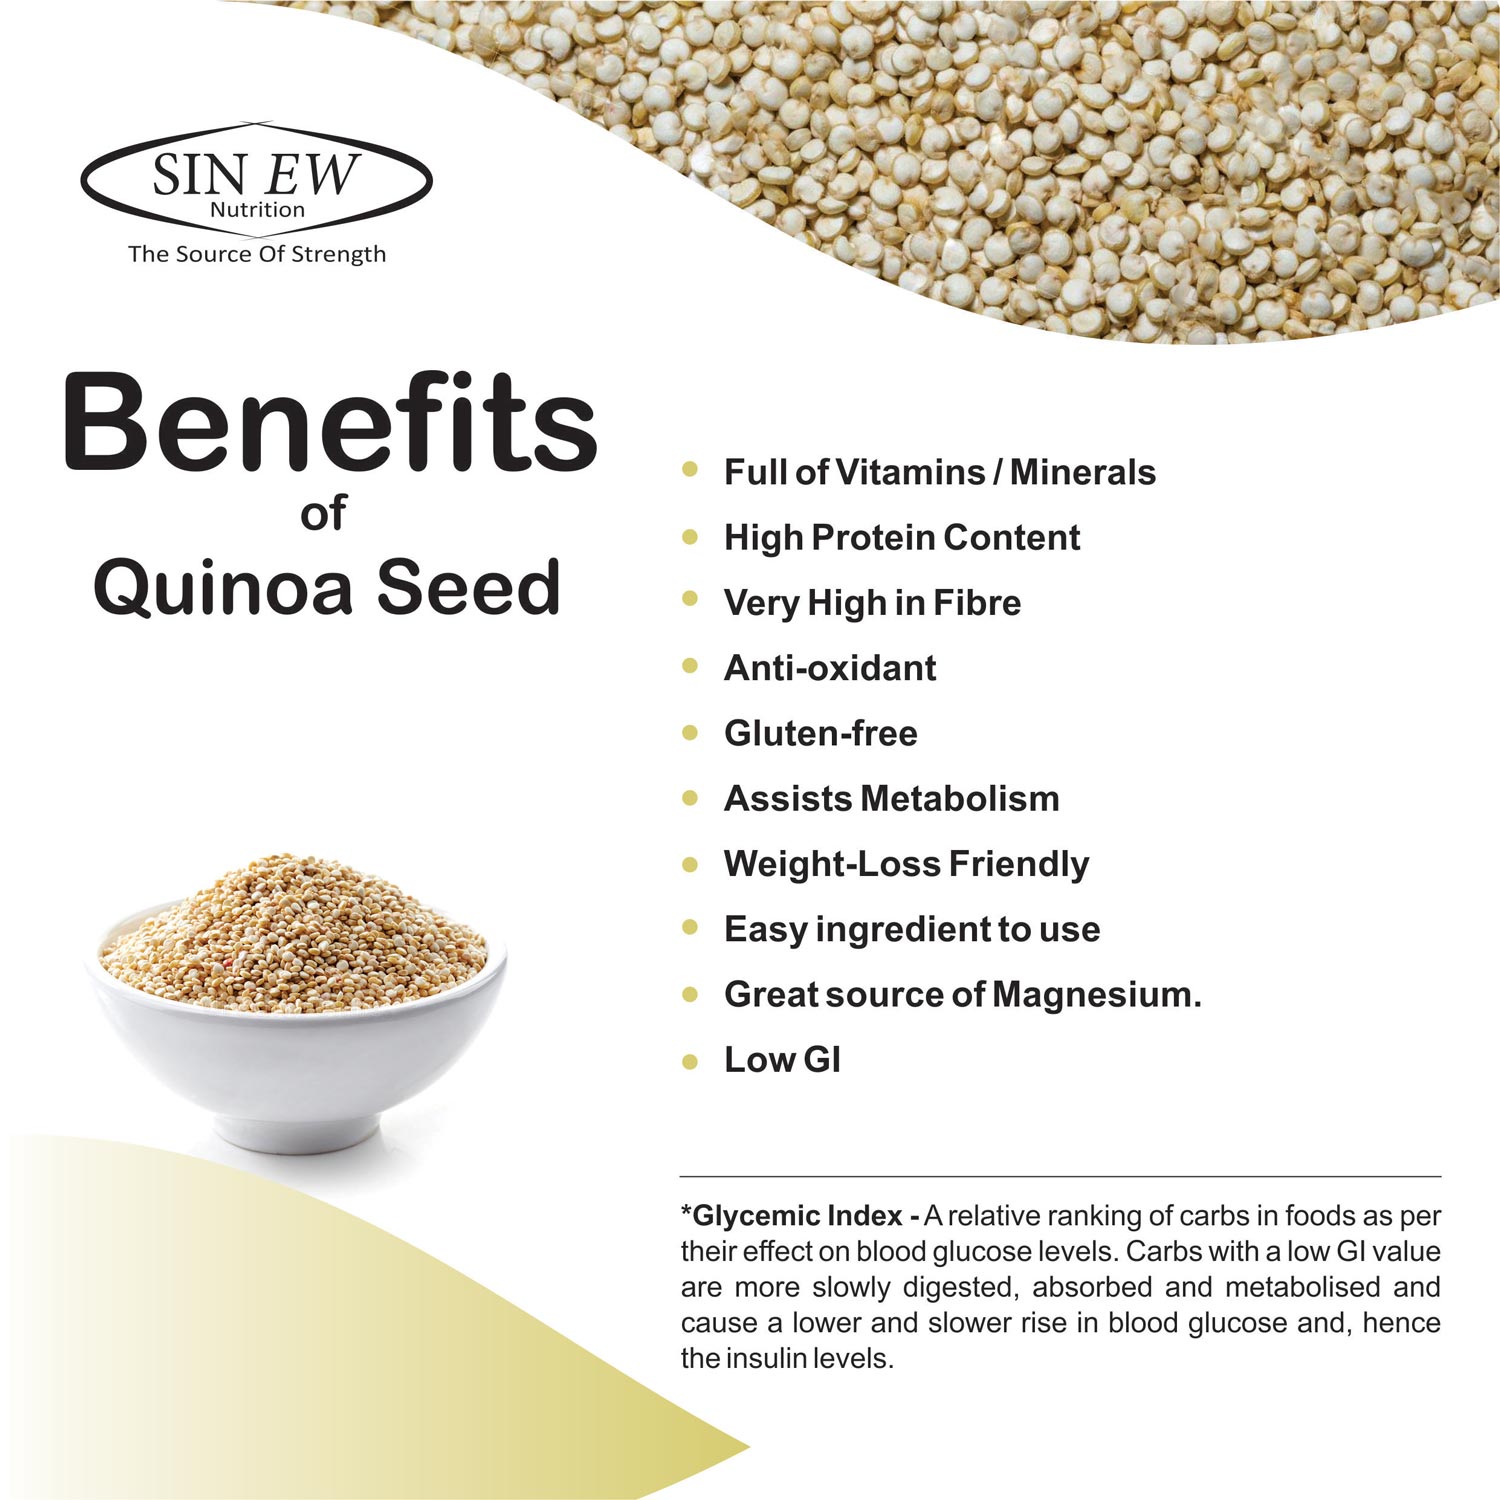 Buy Sinew Quinoa Seeds 800gm Online in India at Sinew Nutrition. 